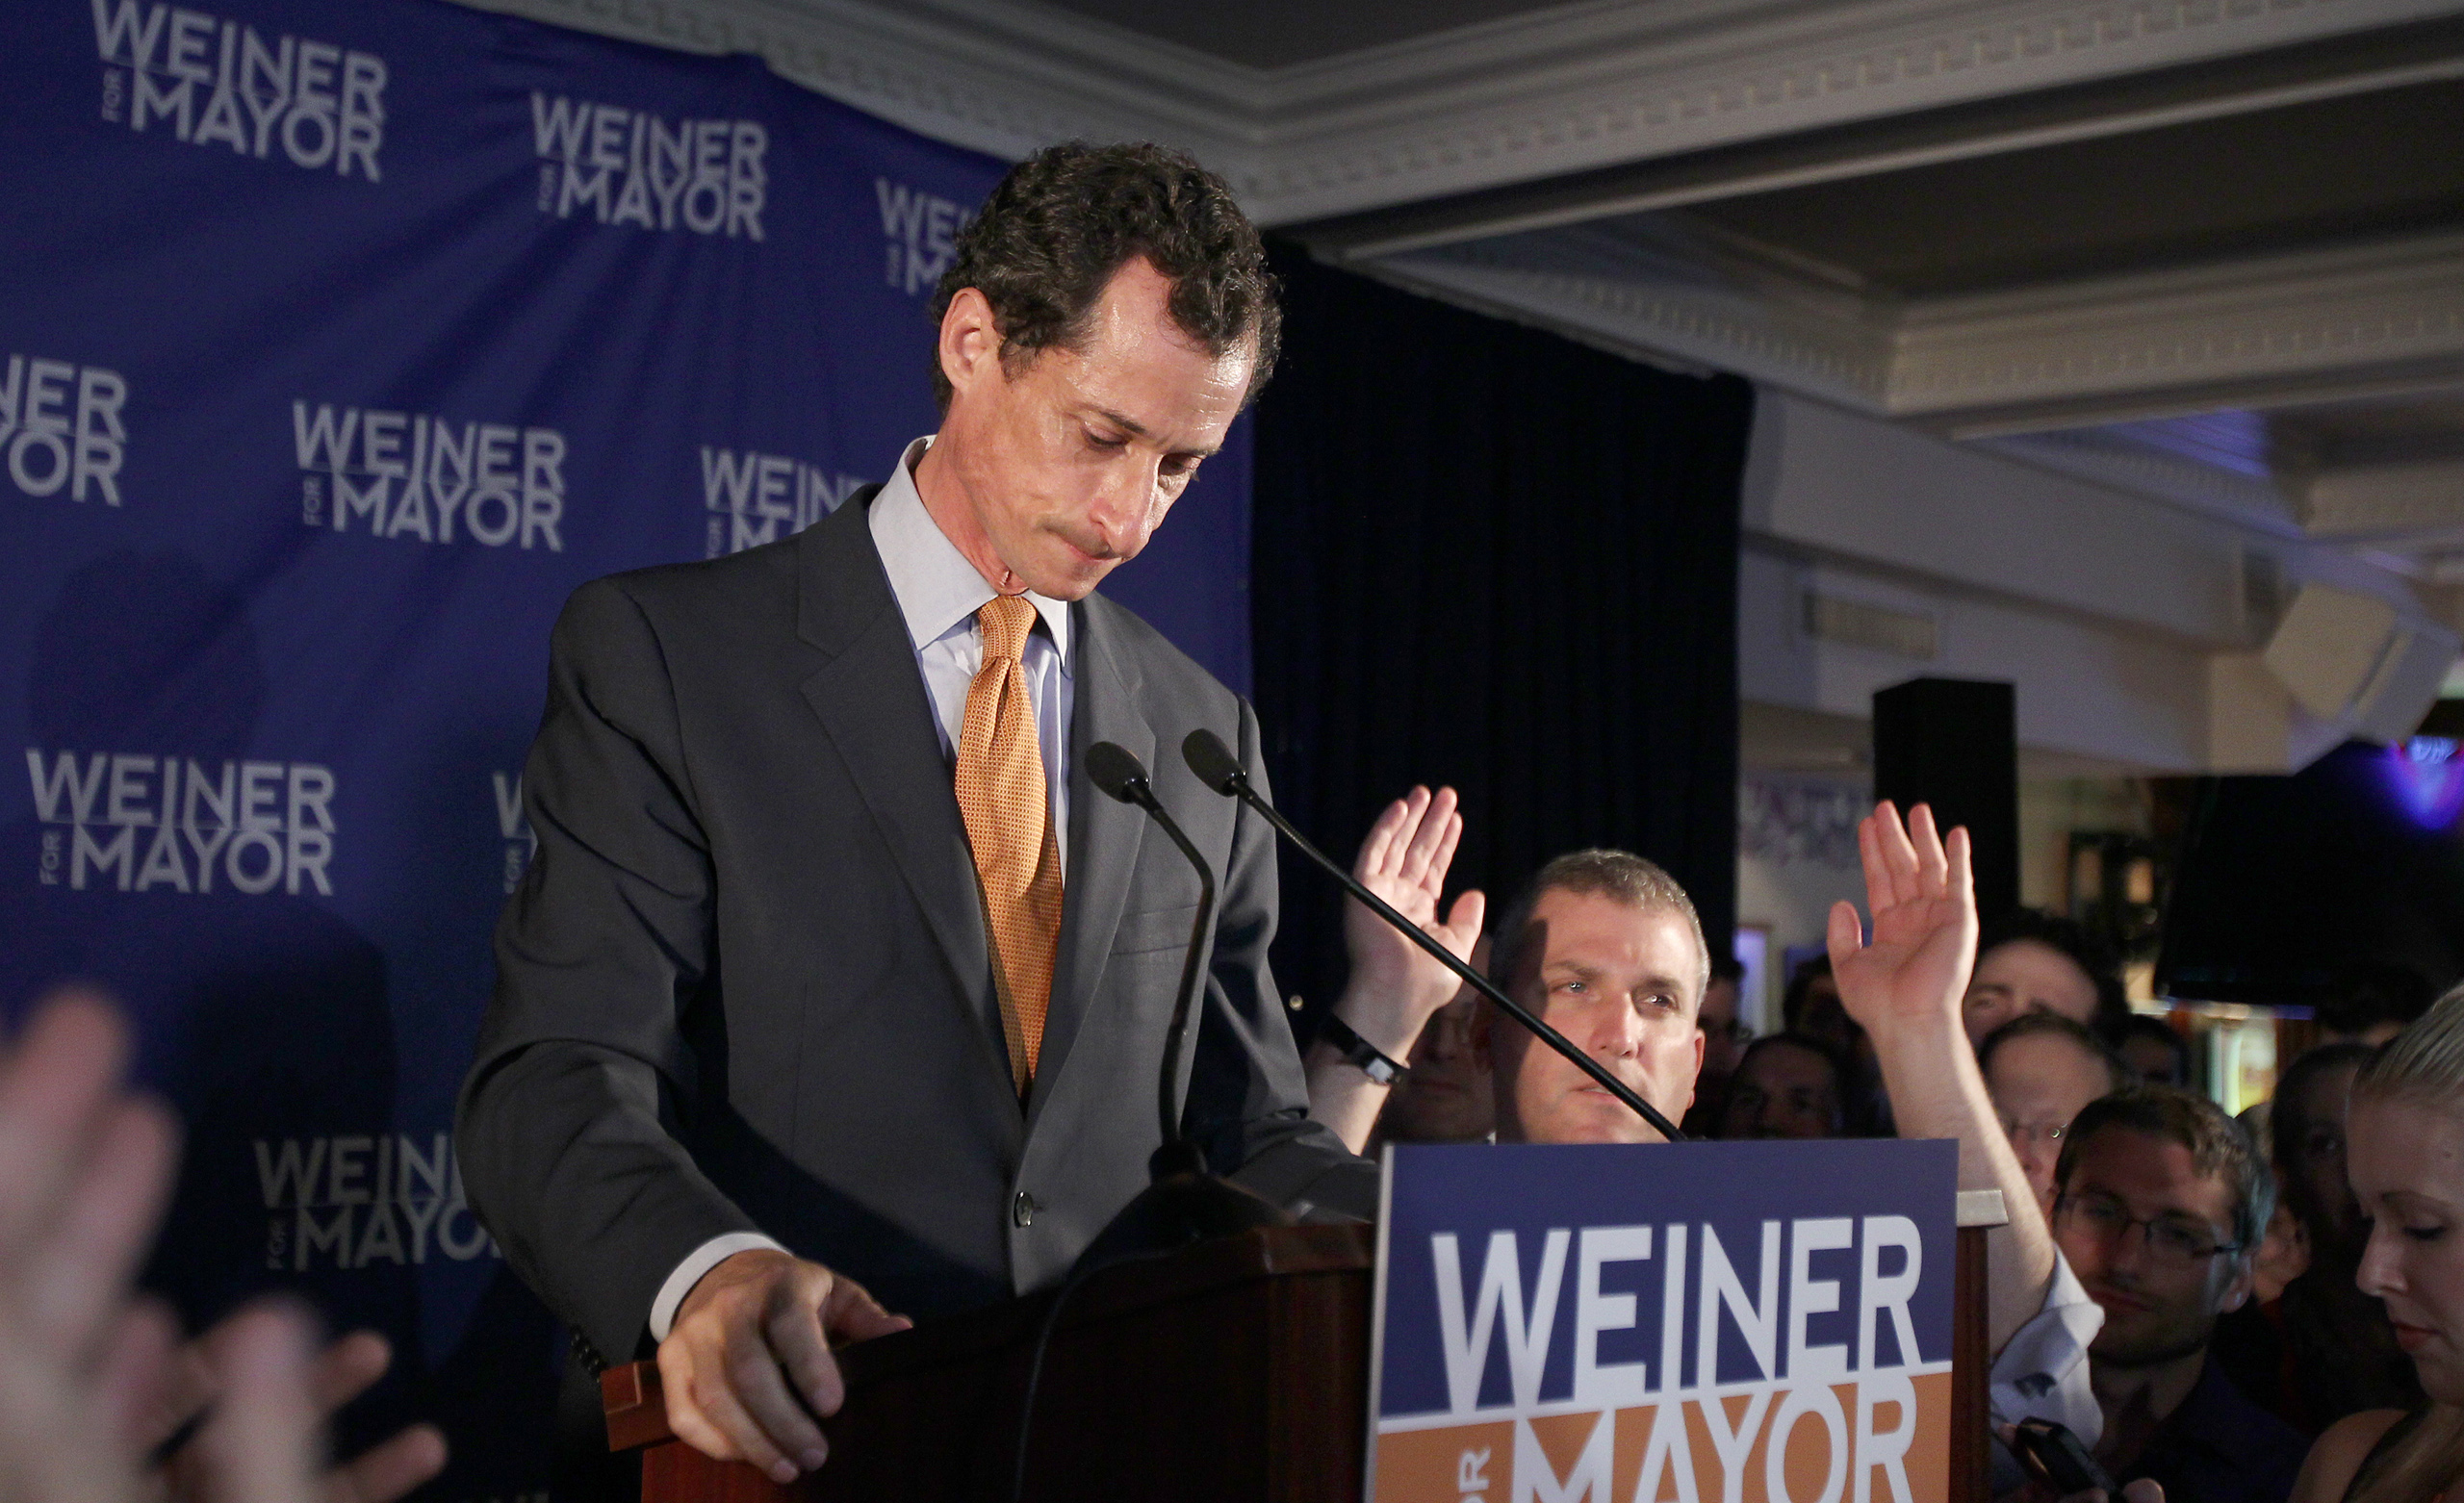 Democratic mayoral hopeful Anthony Weiner makes his concession speech at Connolly's Pub in midtown in New York City on Sept. 10, 2013. (Donald Traill—AP)